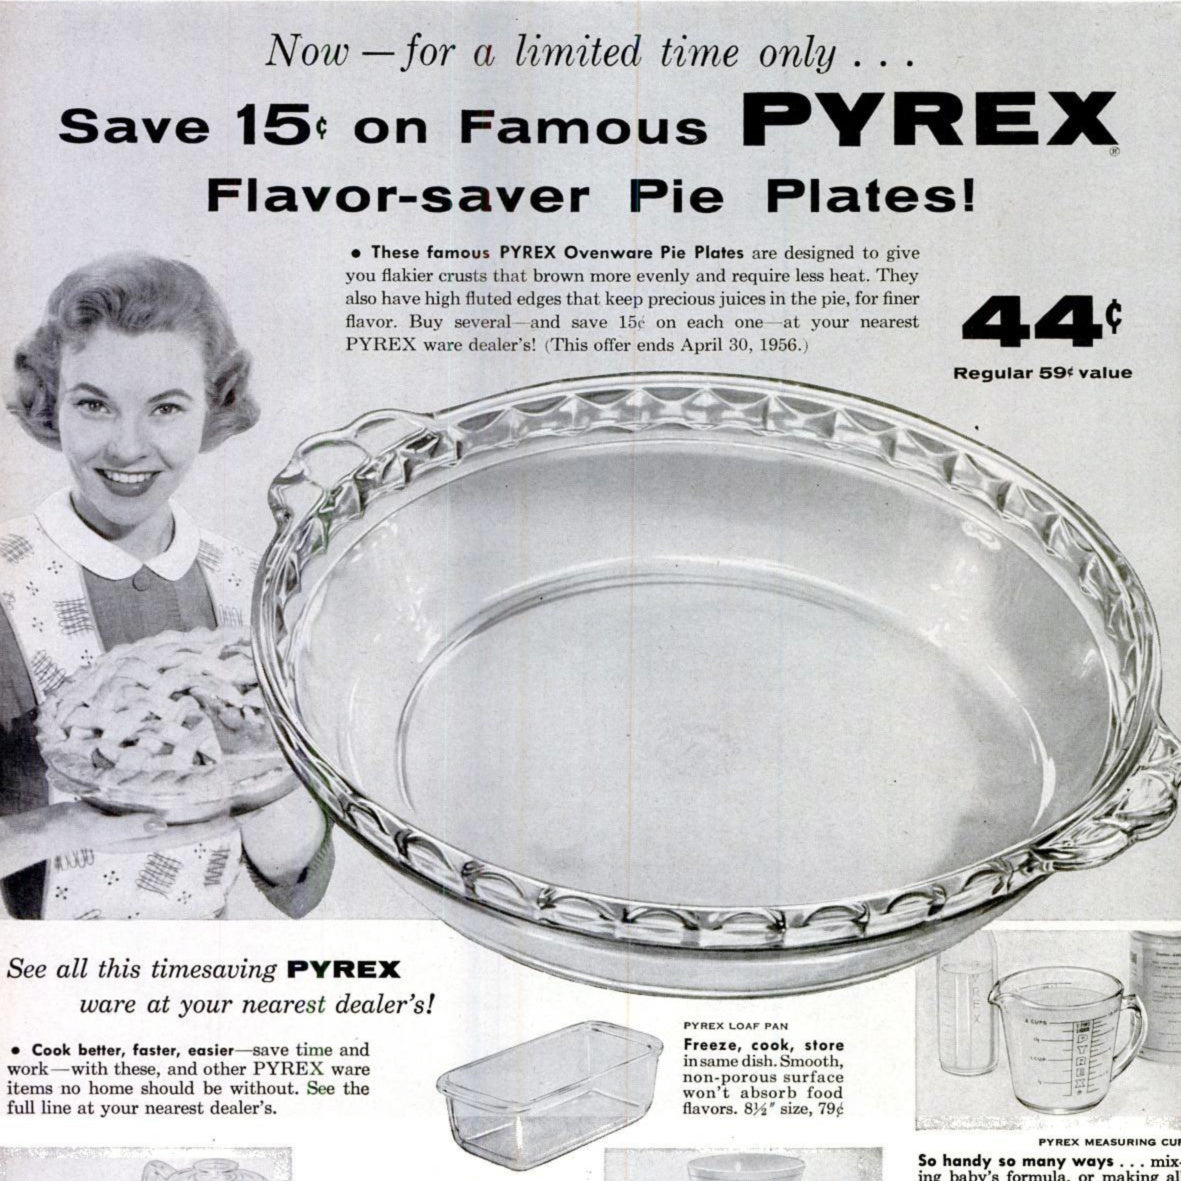 Vintage 1950s White Pyrex Flavor Saver Pie Dish with Fluted Edge and Handles